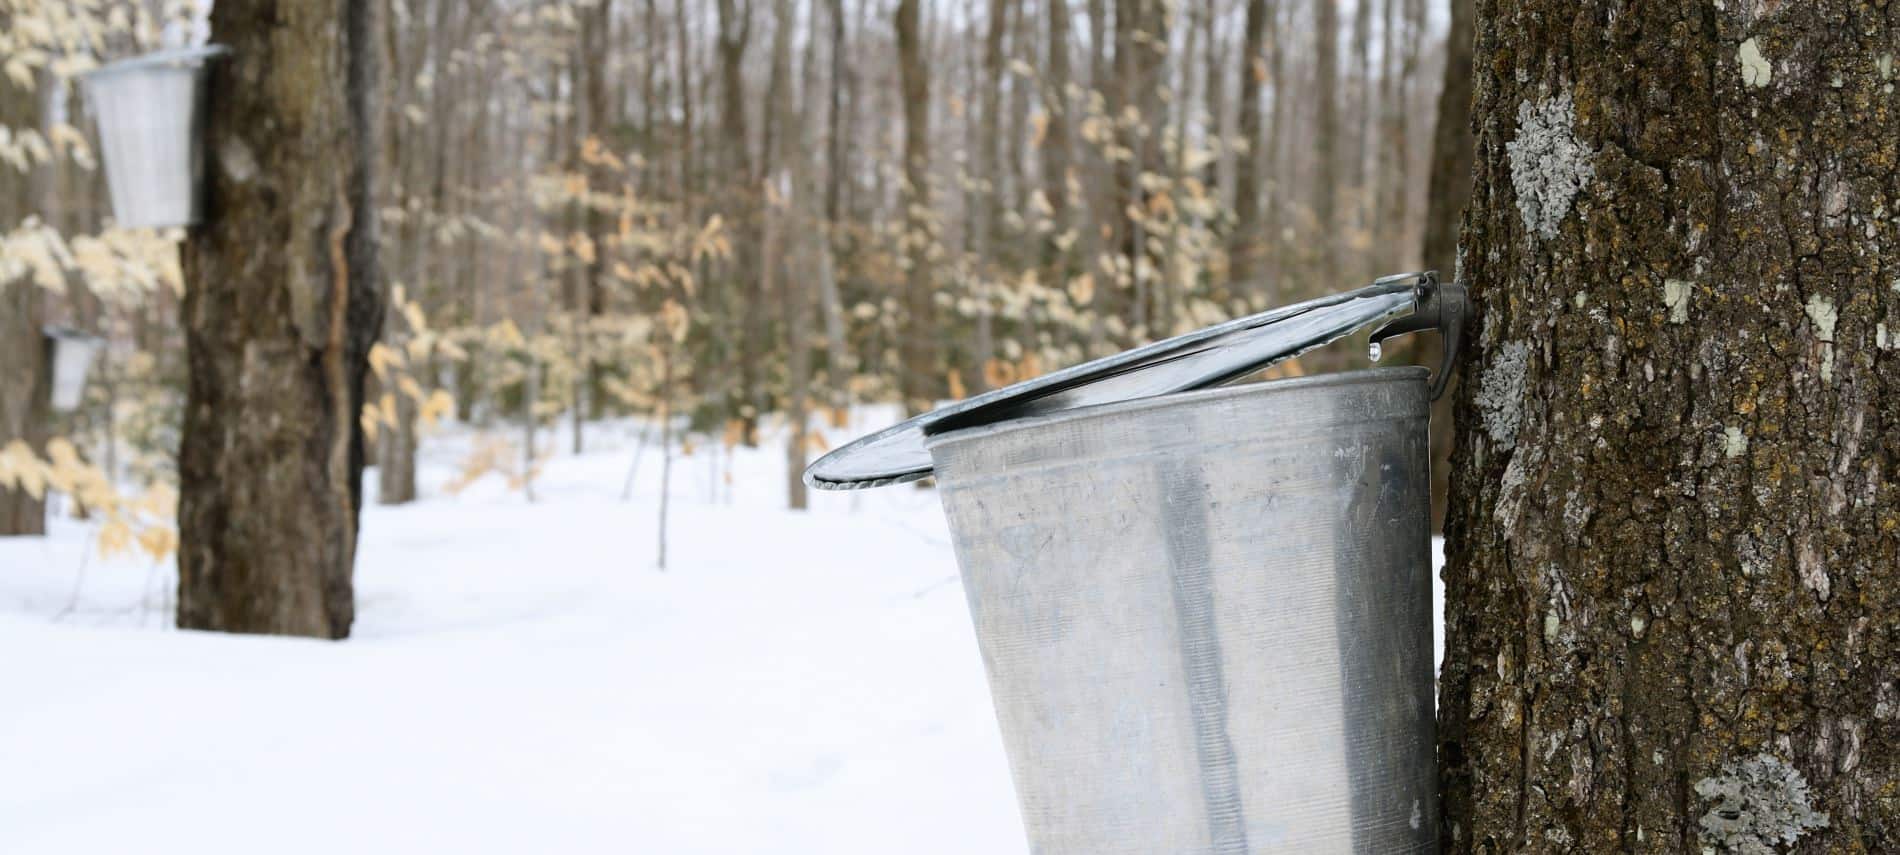 Silver pail hooked on a maple tree collecting syrup with snow-covered ground and hundreds of trees in the background